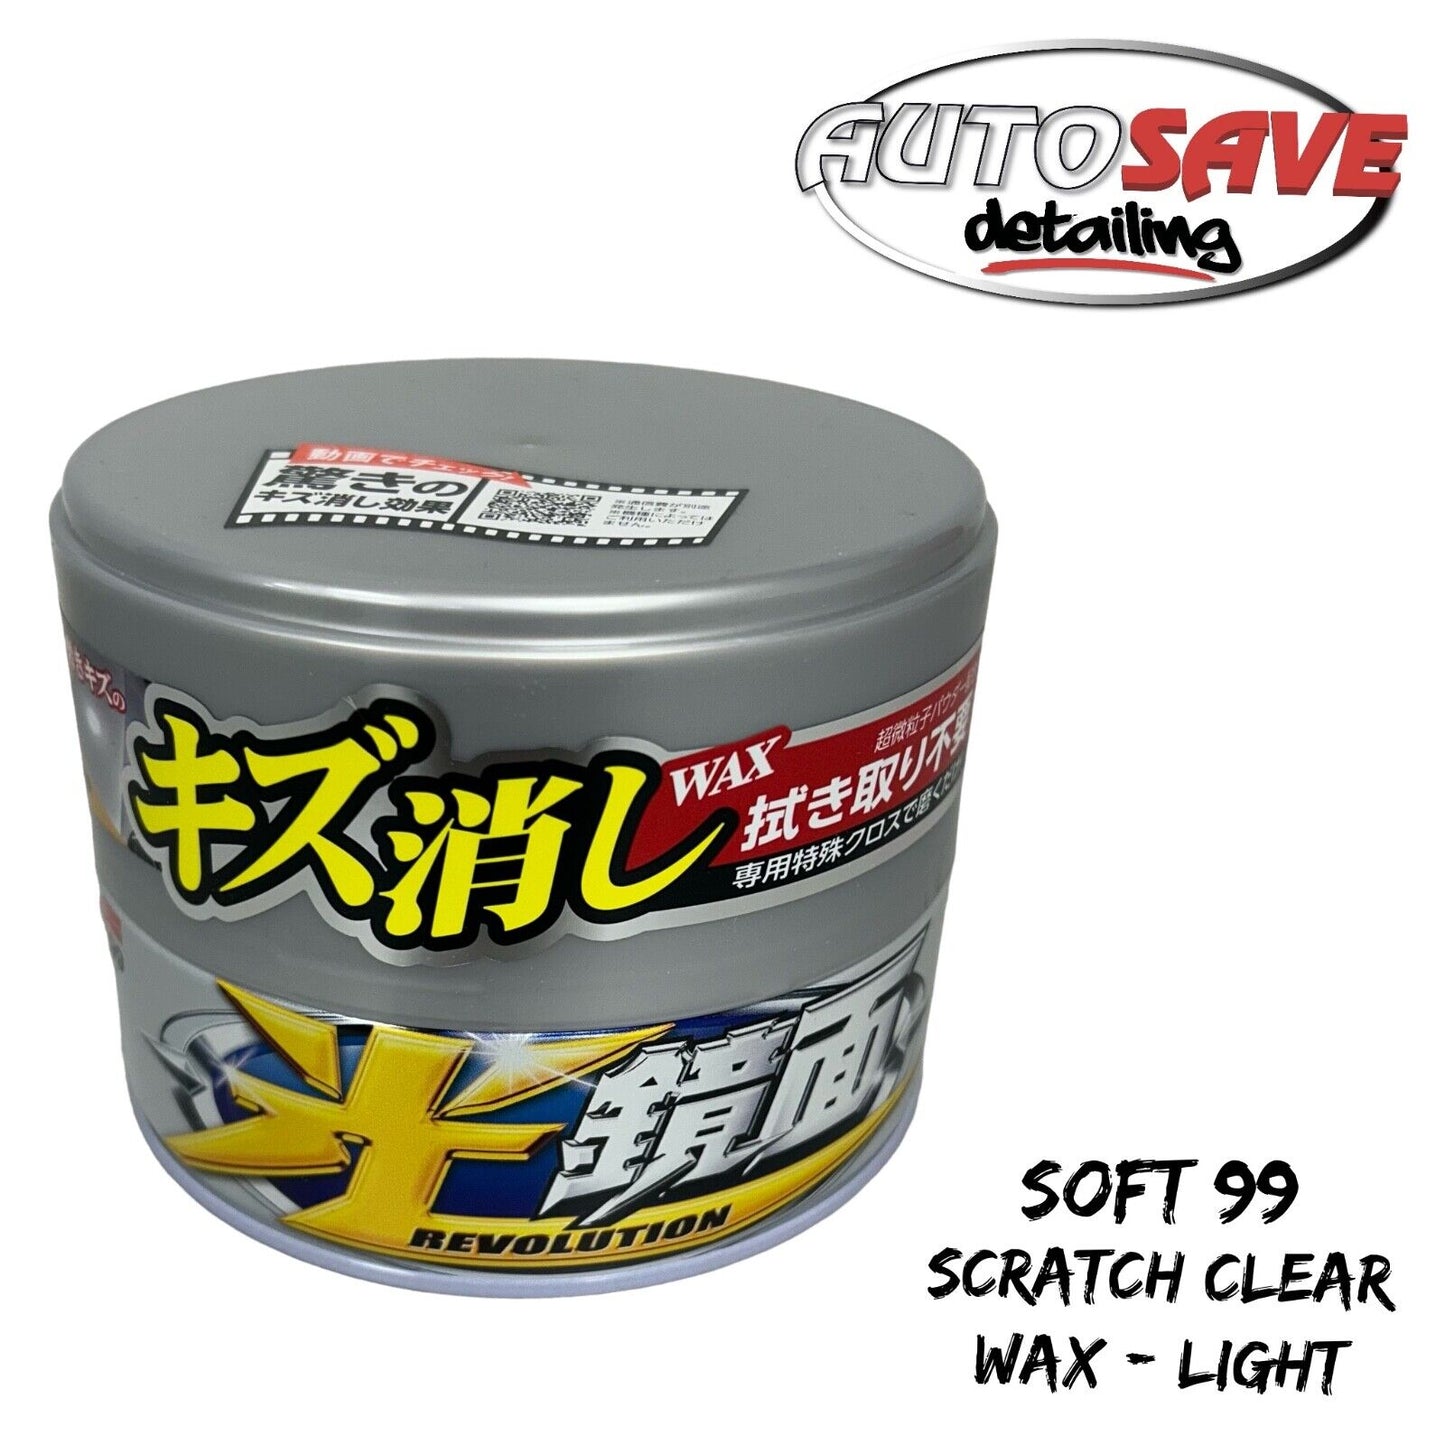 SOFT99 NEW SCRATCH CLEAR LIGHT WAX FILLS SWIRLS AND MASKS IMPERFECTIONS